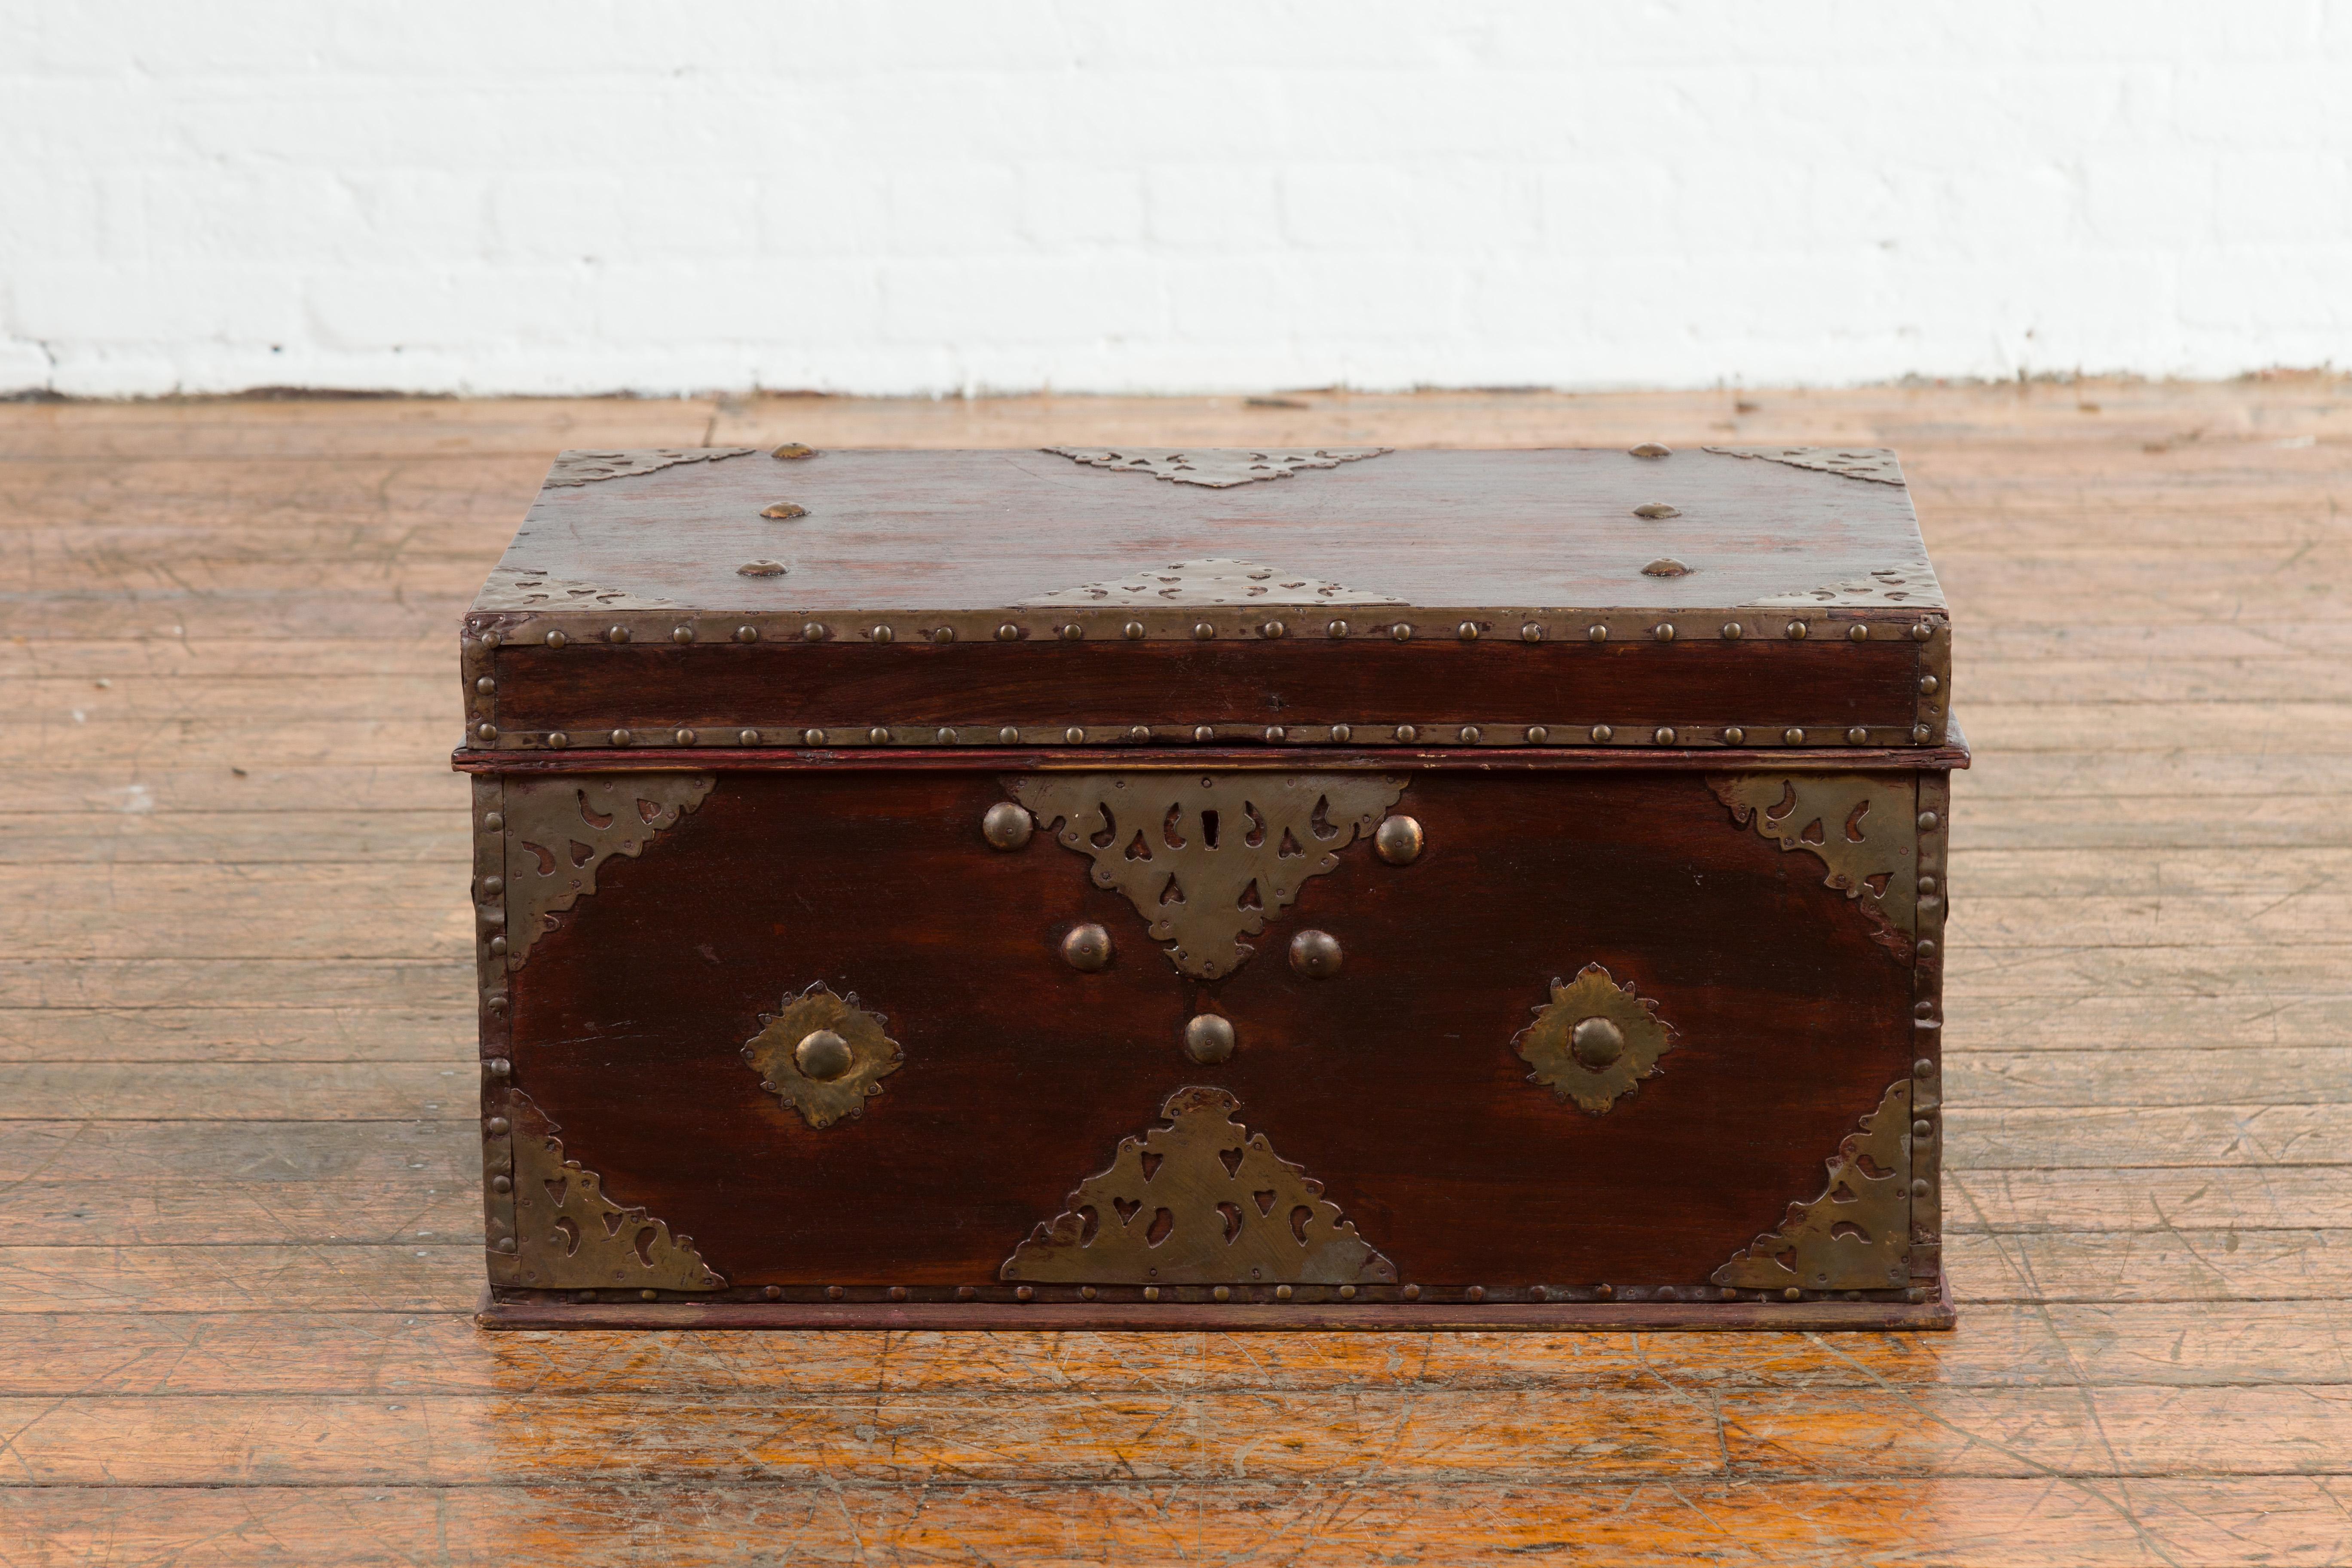 An Indonesia antique wooden blanket chest from the 19th century, with detailed brass hardware. Created in Indonesia during the 19th century, this unusual blanket chest features a wooden body adorned with ornate cut-out brass hardware and studs. The